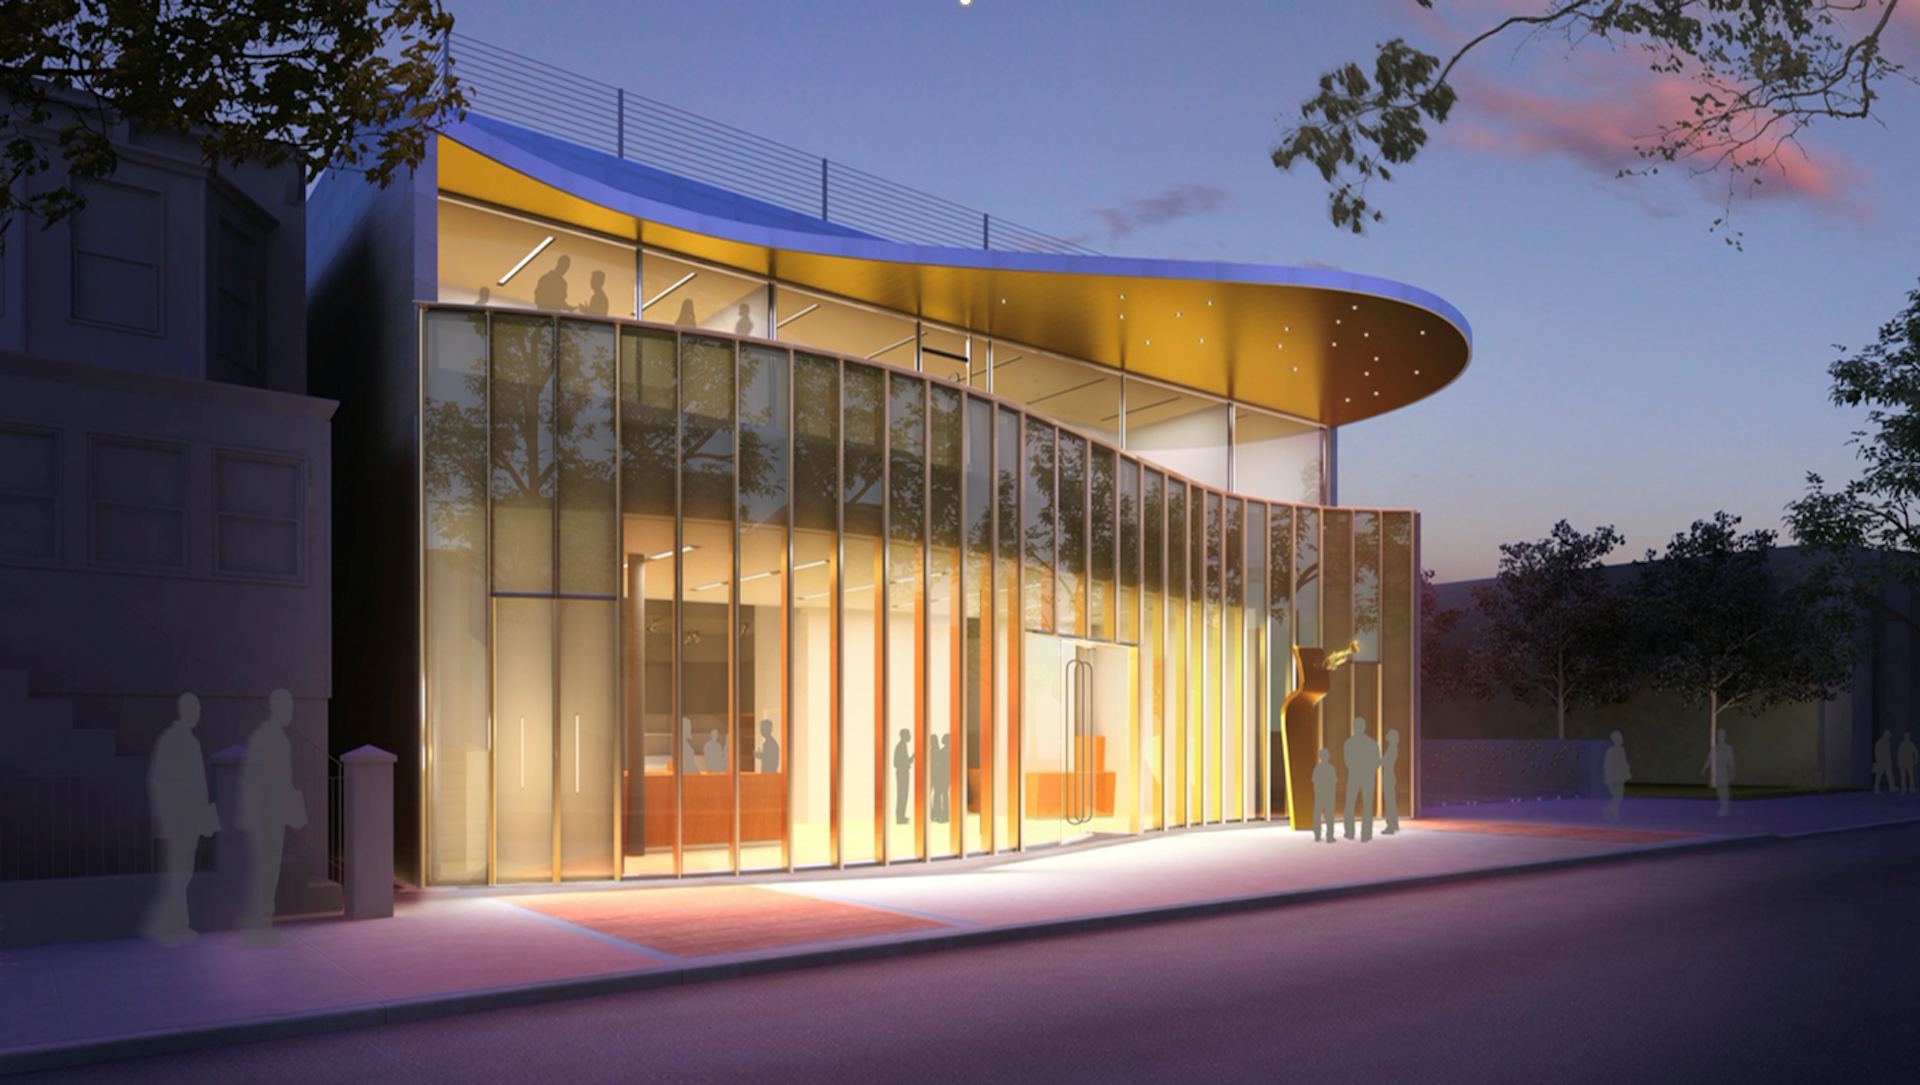 Rendering of the new Louis Armstrong Center, which is being built across the street from the home